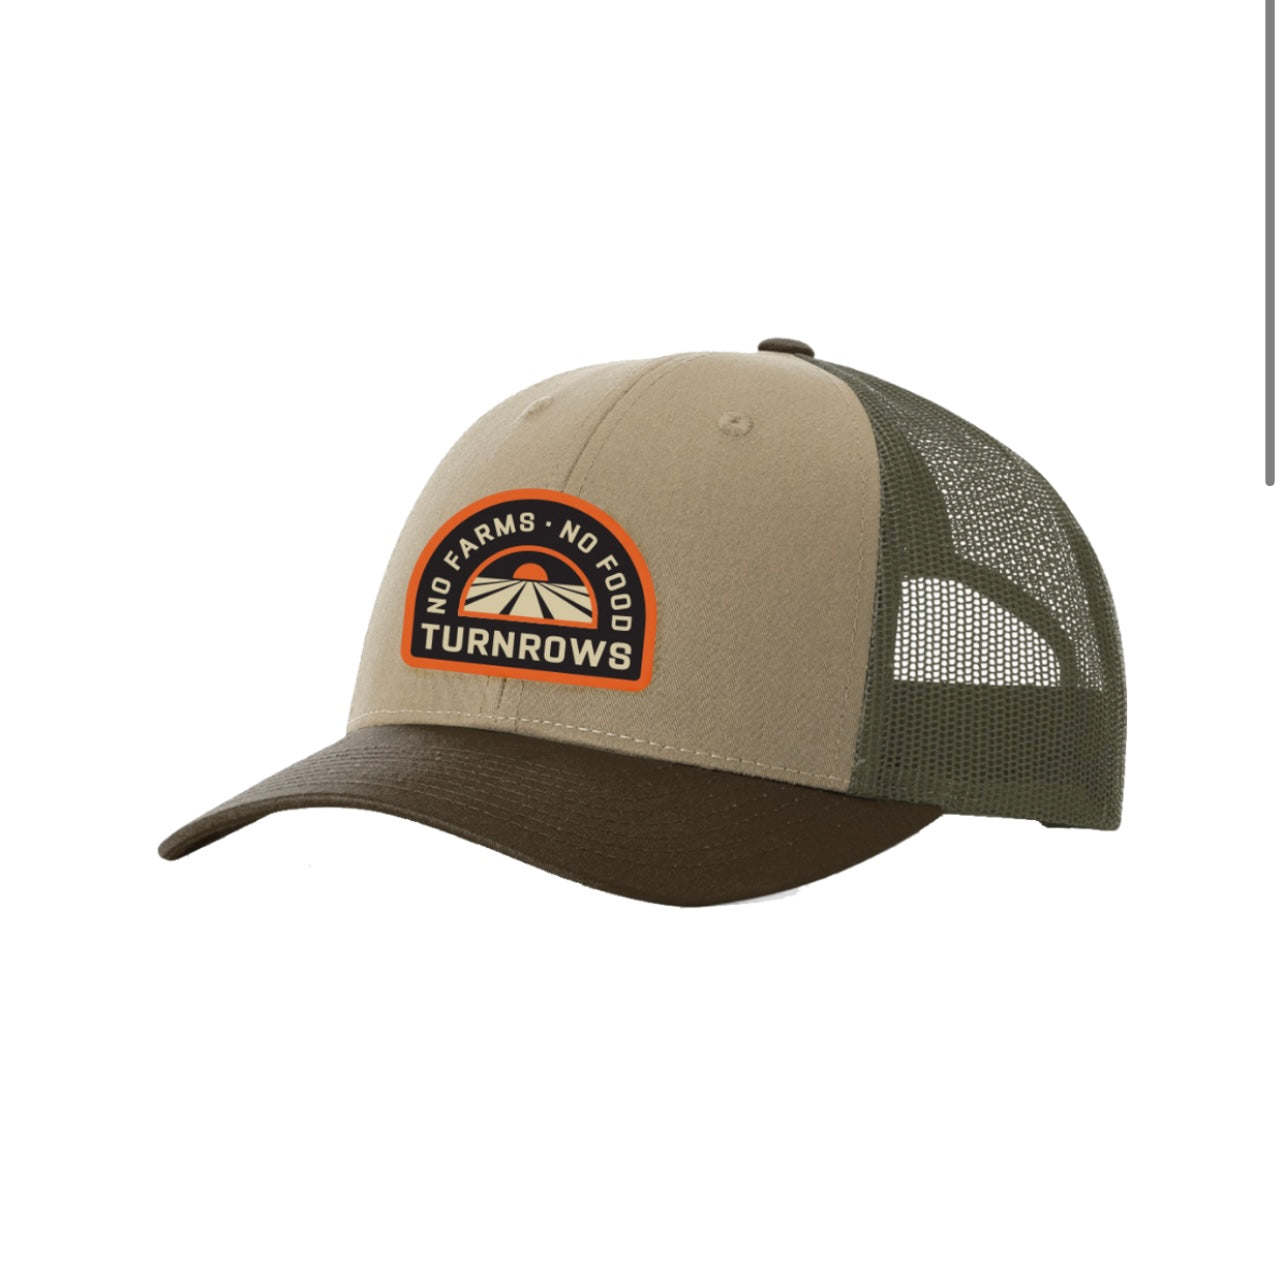 Turnrows No Farms Emb Patch Structured Mesh Back Trucker Cap